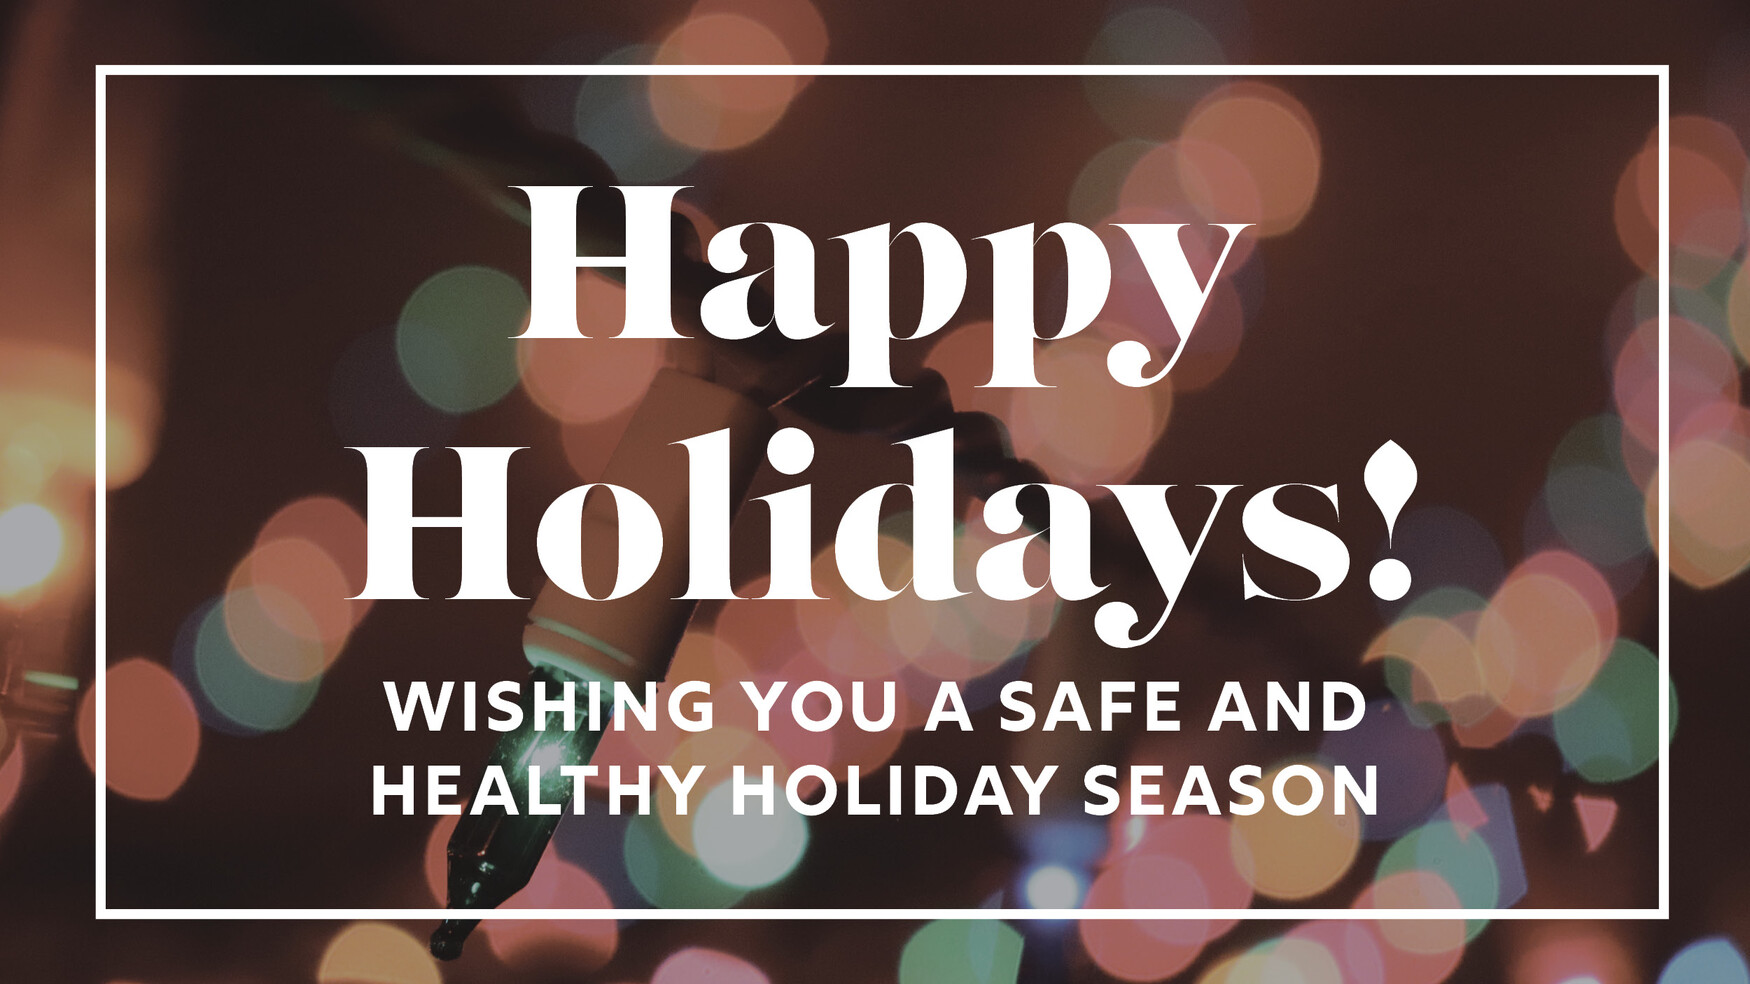 Happy Holidays! Wishing you a safe and healthy holiday season!